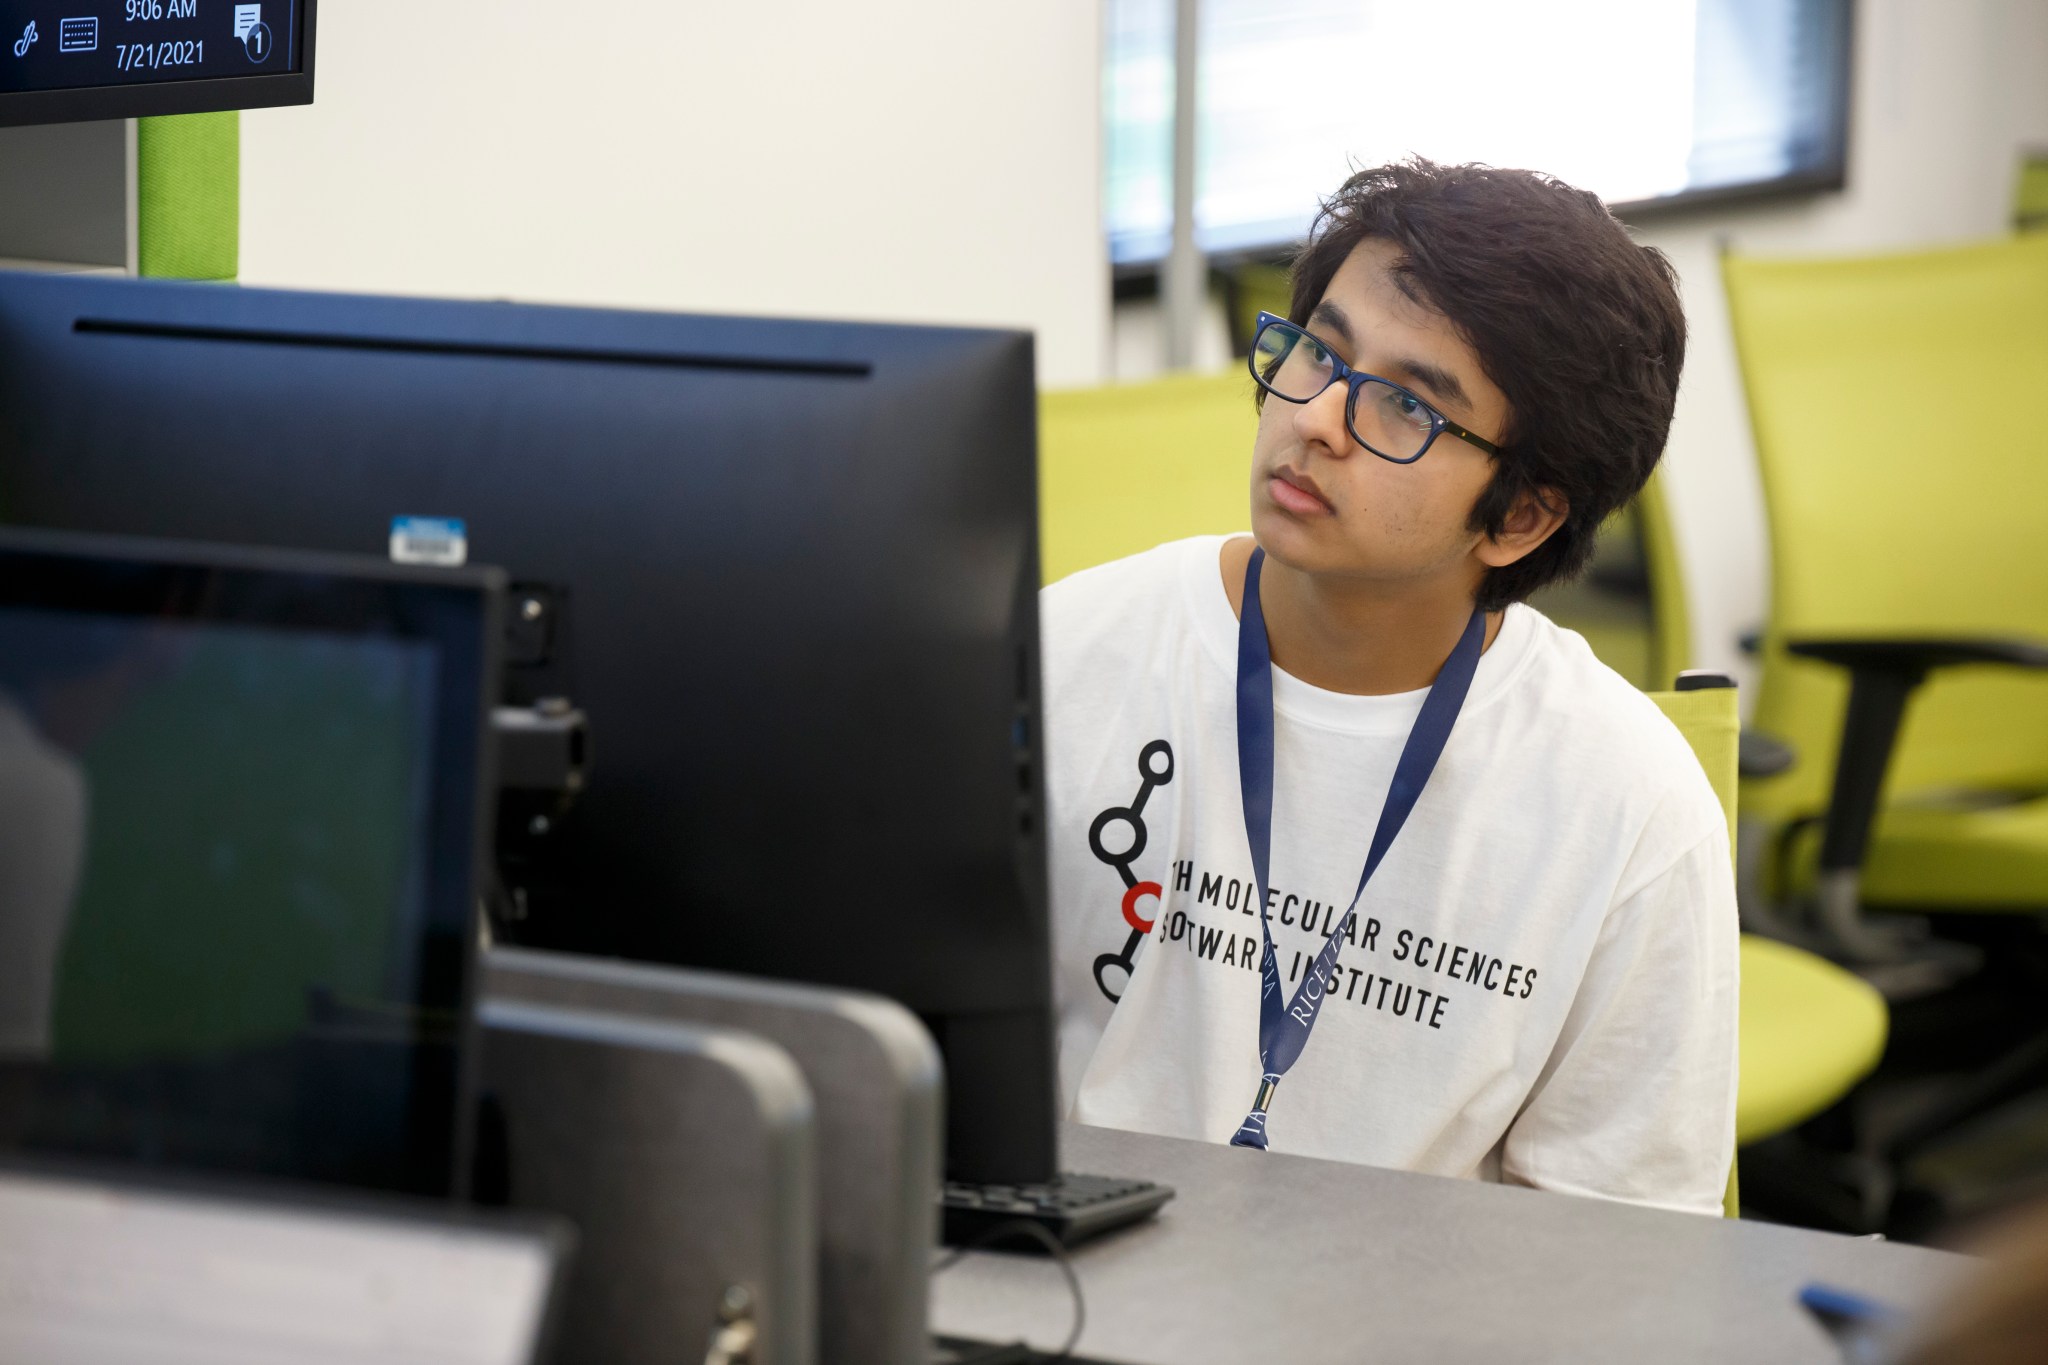 Rawal’s project contributed to the development of an interface that allows students to control robots over local and remote wireless connections. This is him at a computer.